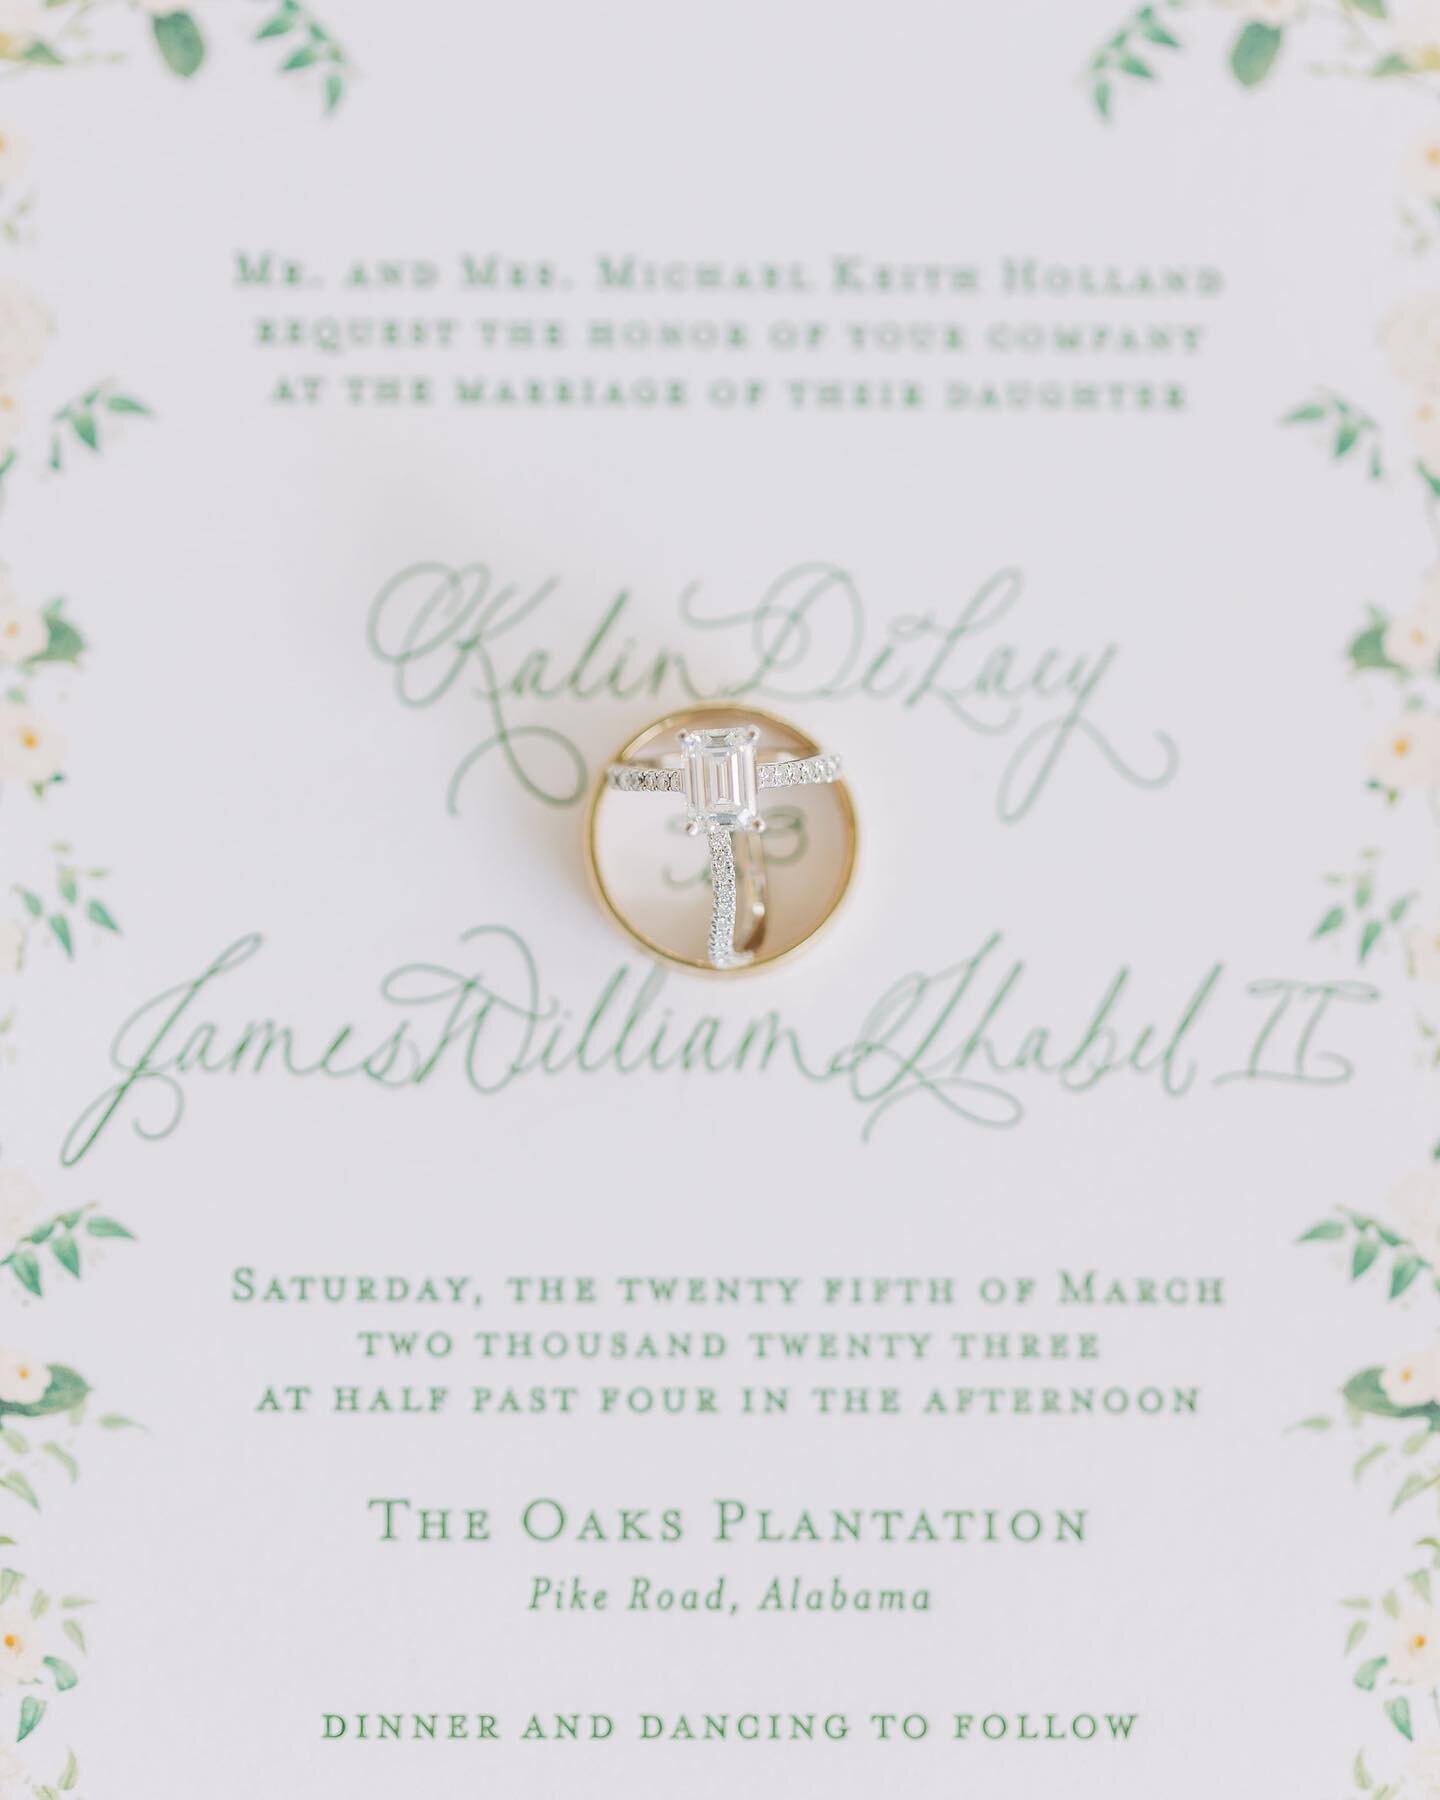 Are you still in search of a stationer to create your one of a kind wedding suite? Each story is unique, just like your wedding paper should be! We have a few spots left for 2023 and would love to work with you to create your one of a kind design. If